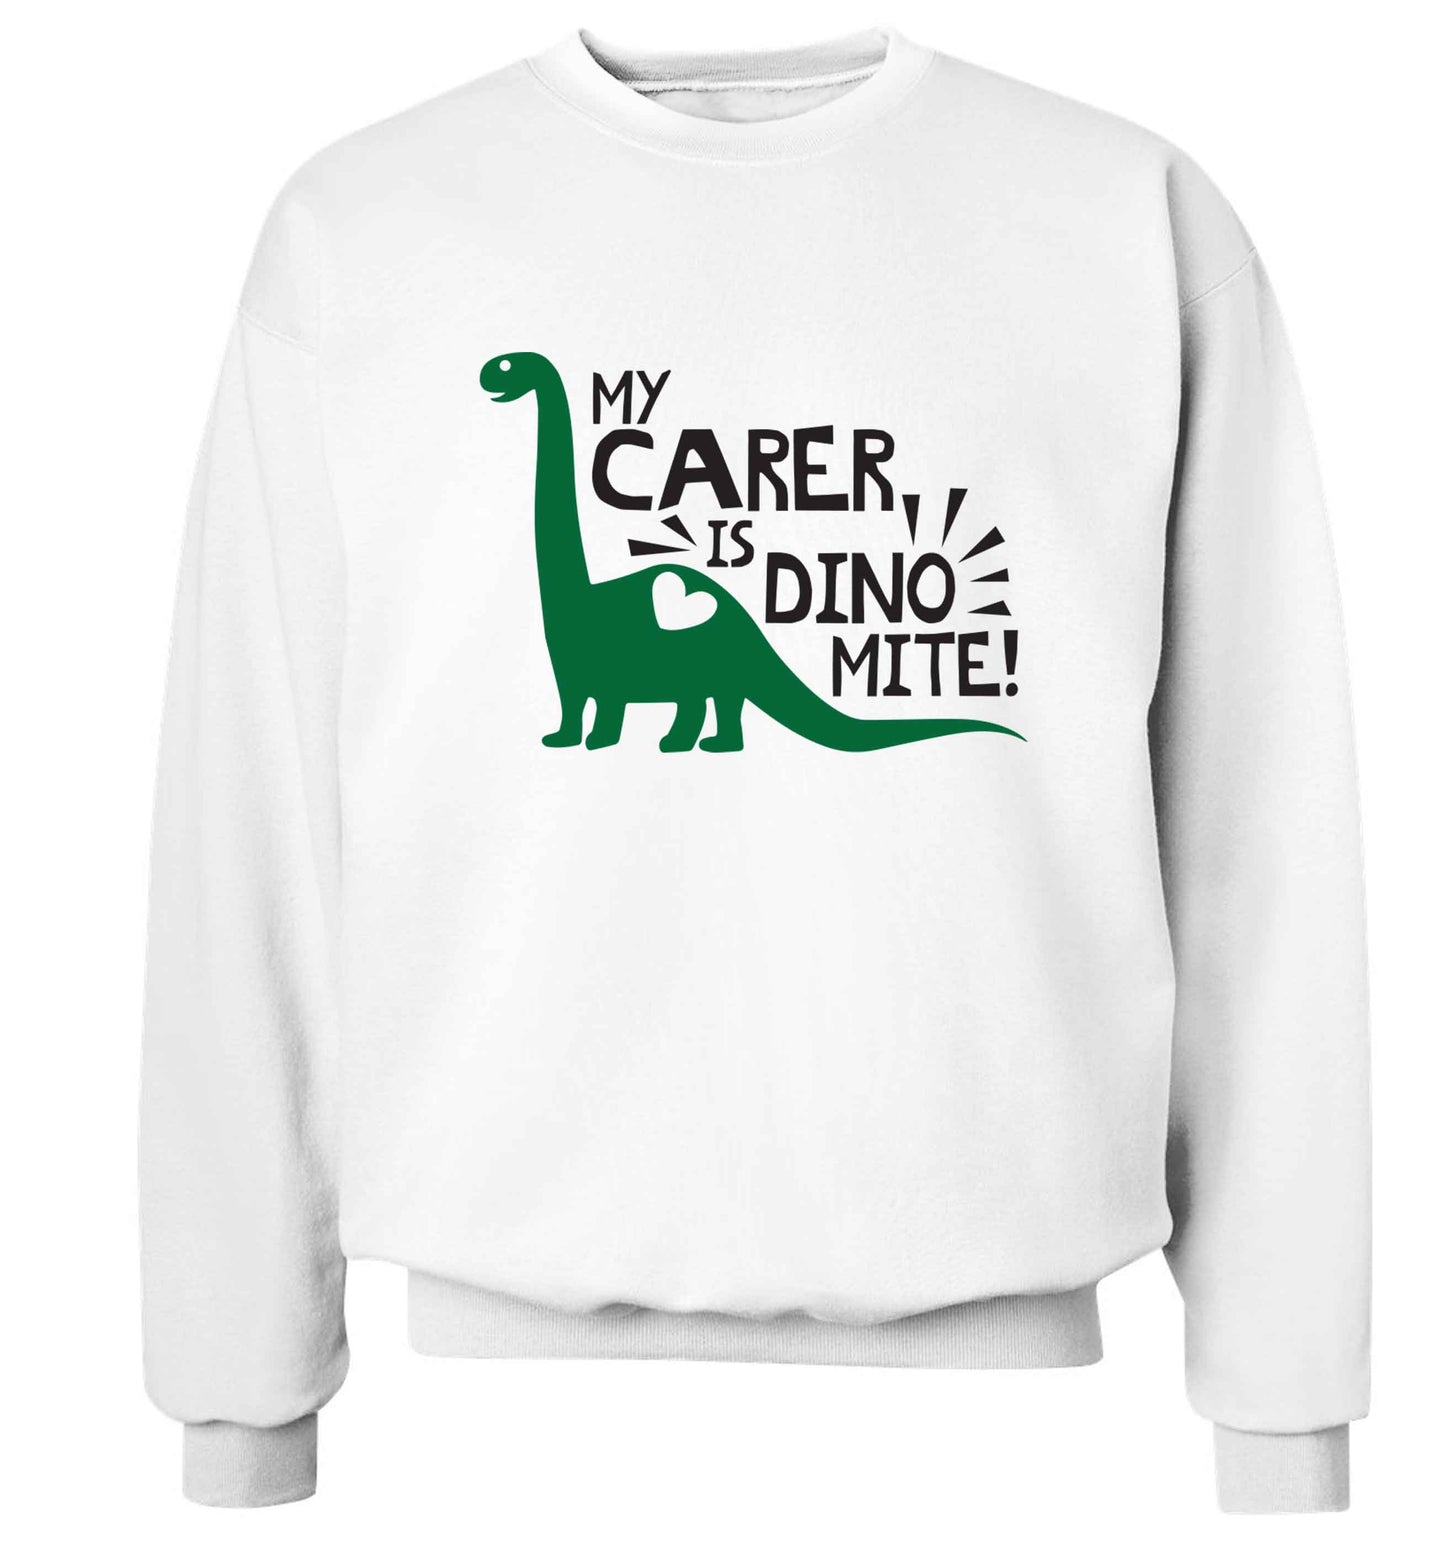 My carer is dinomite! Adult's unisex white Sweater 2XL